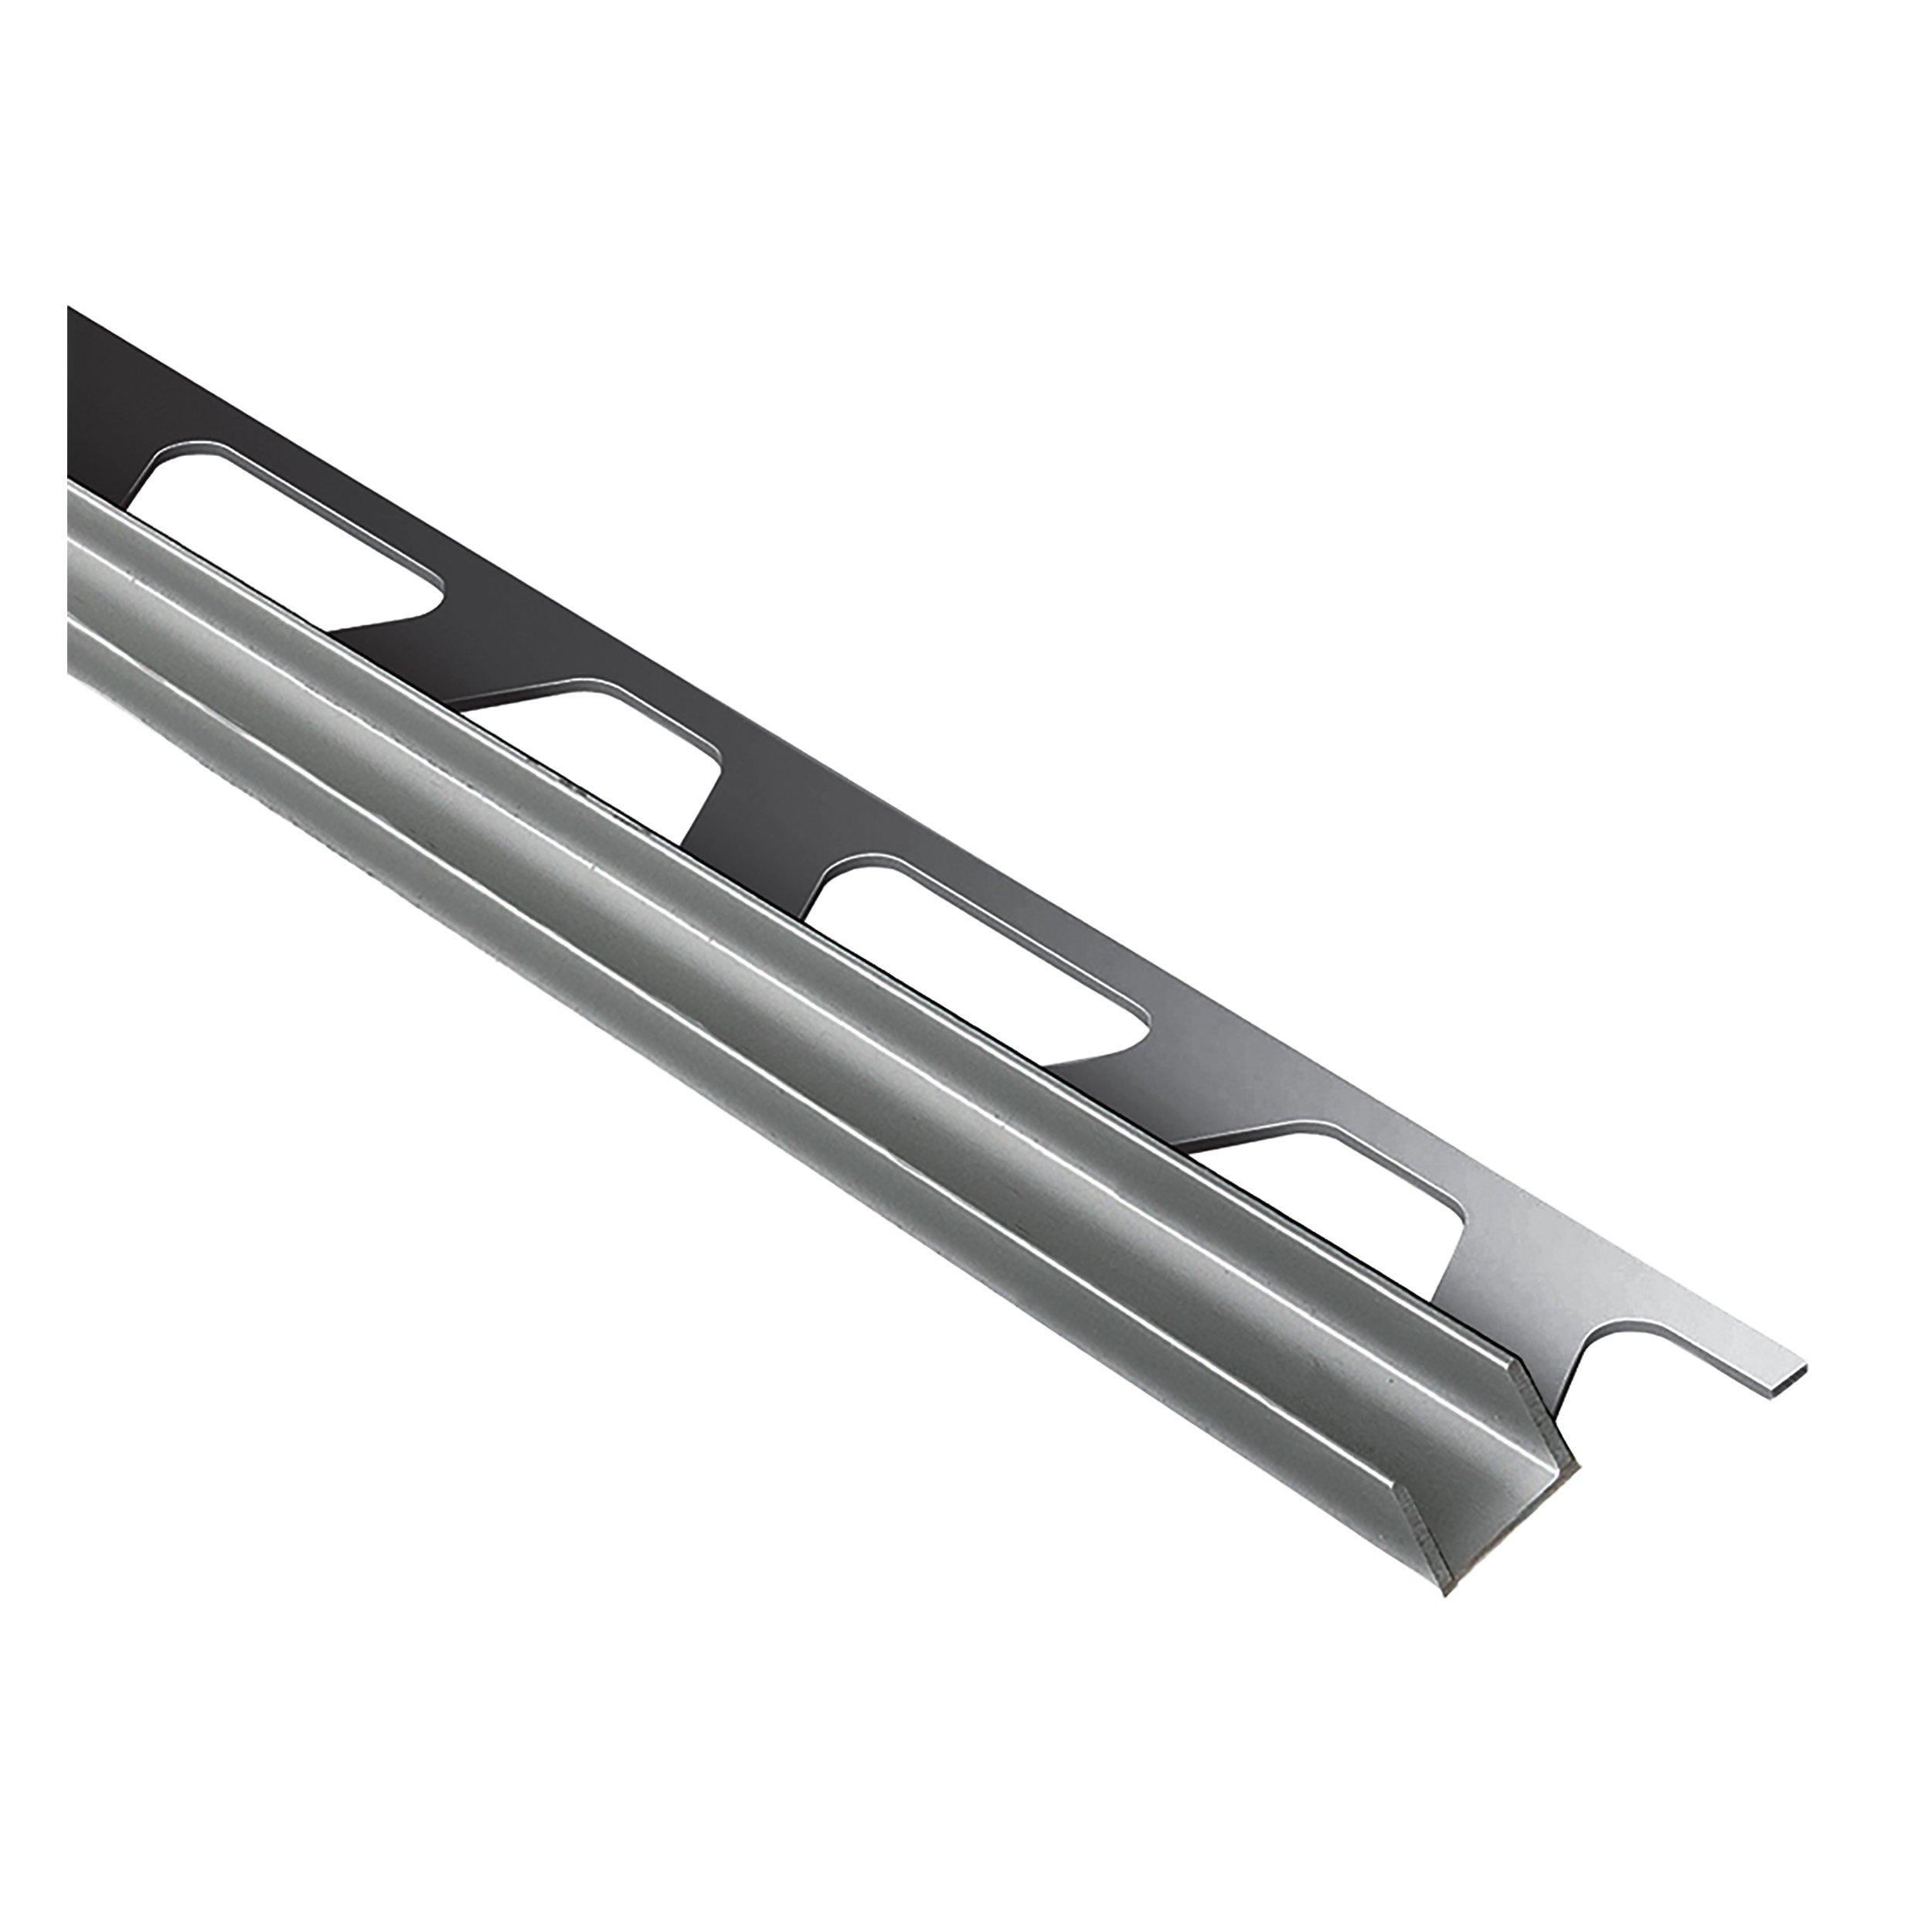 Schluter Deco-Sg 5/16in. Brushed Stainless Steel 15mm